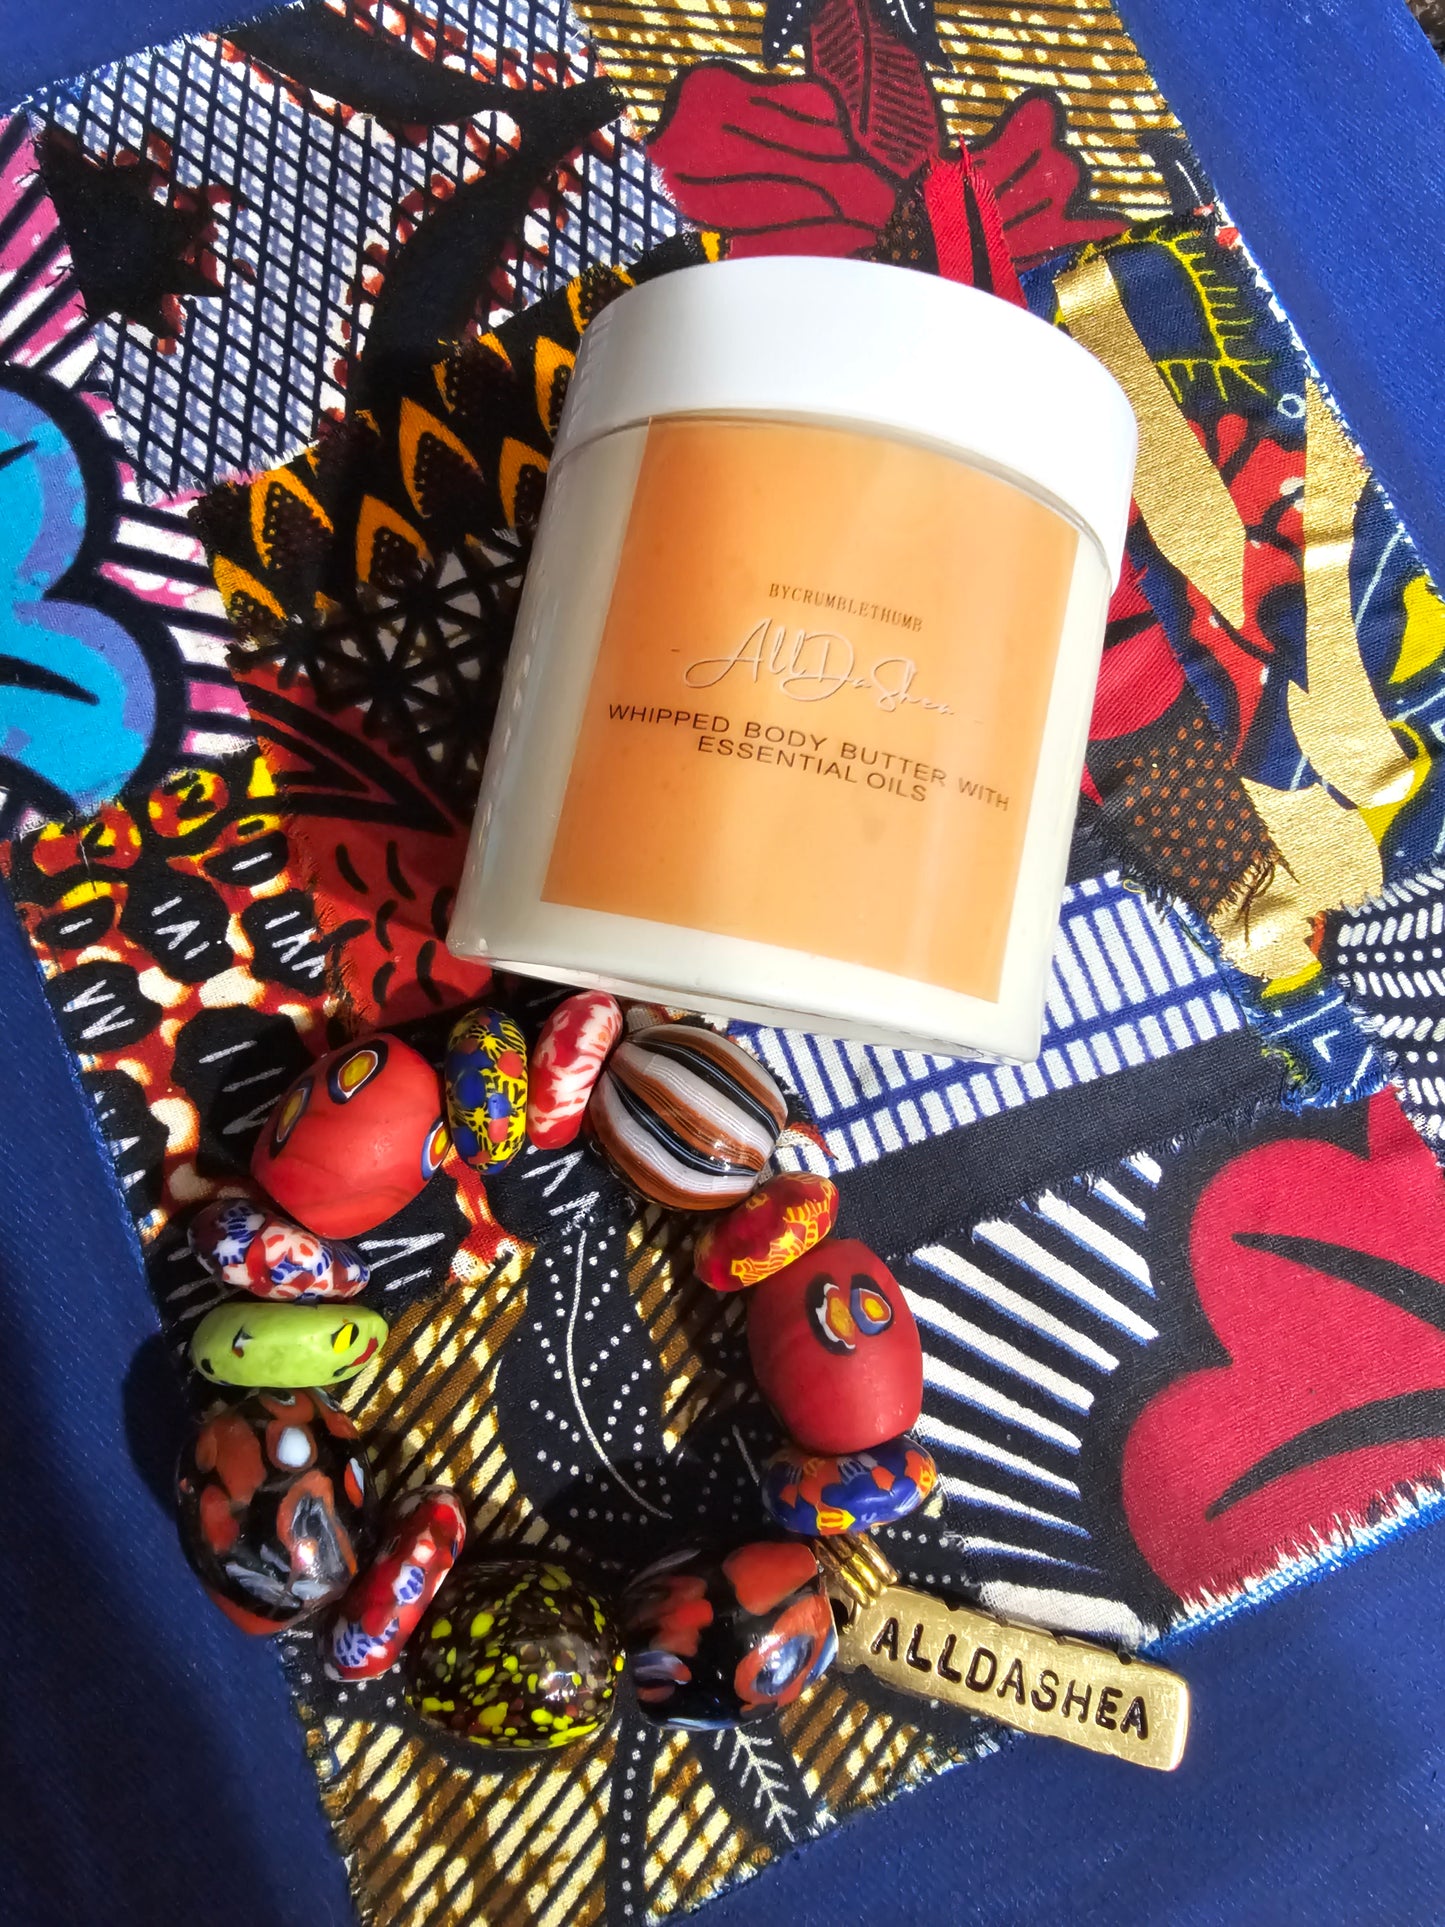 "Spa Day" Whipped Body Butter